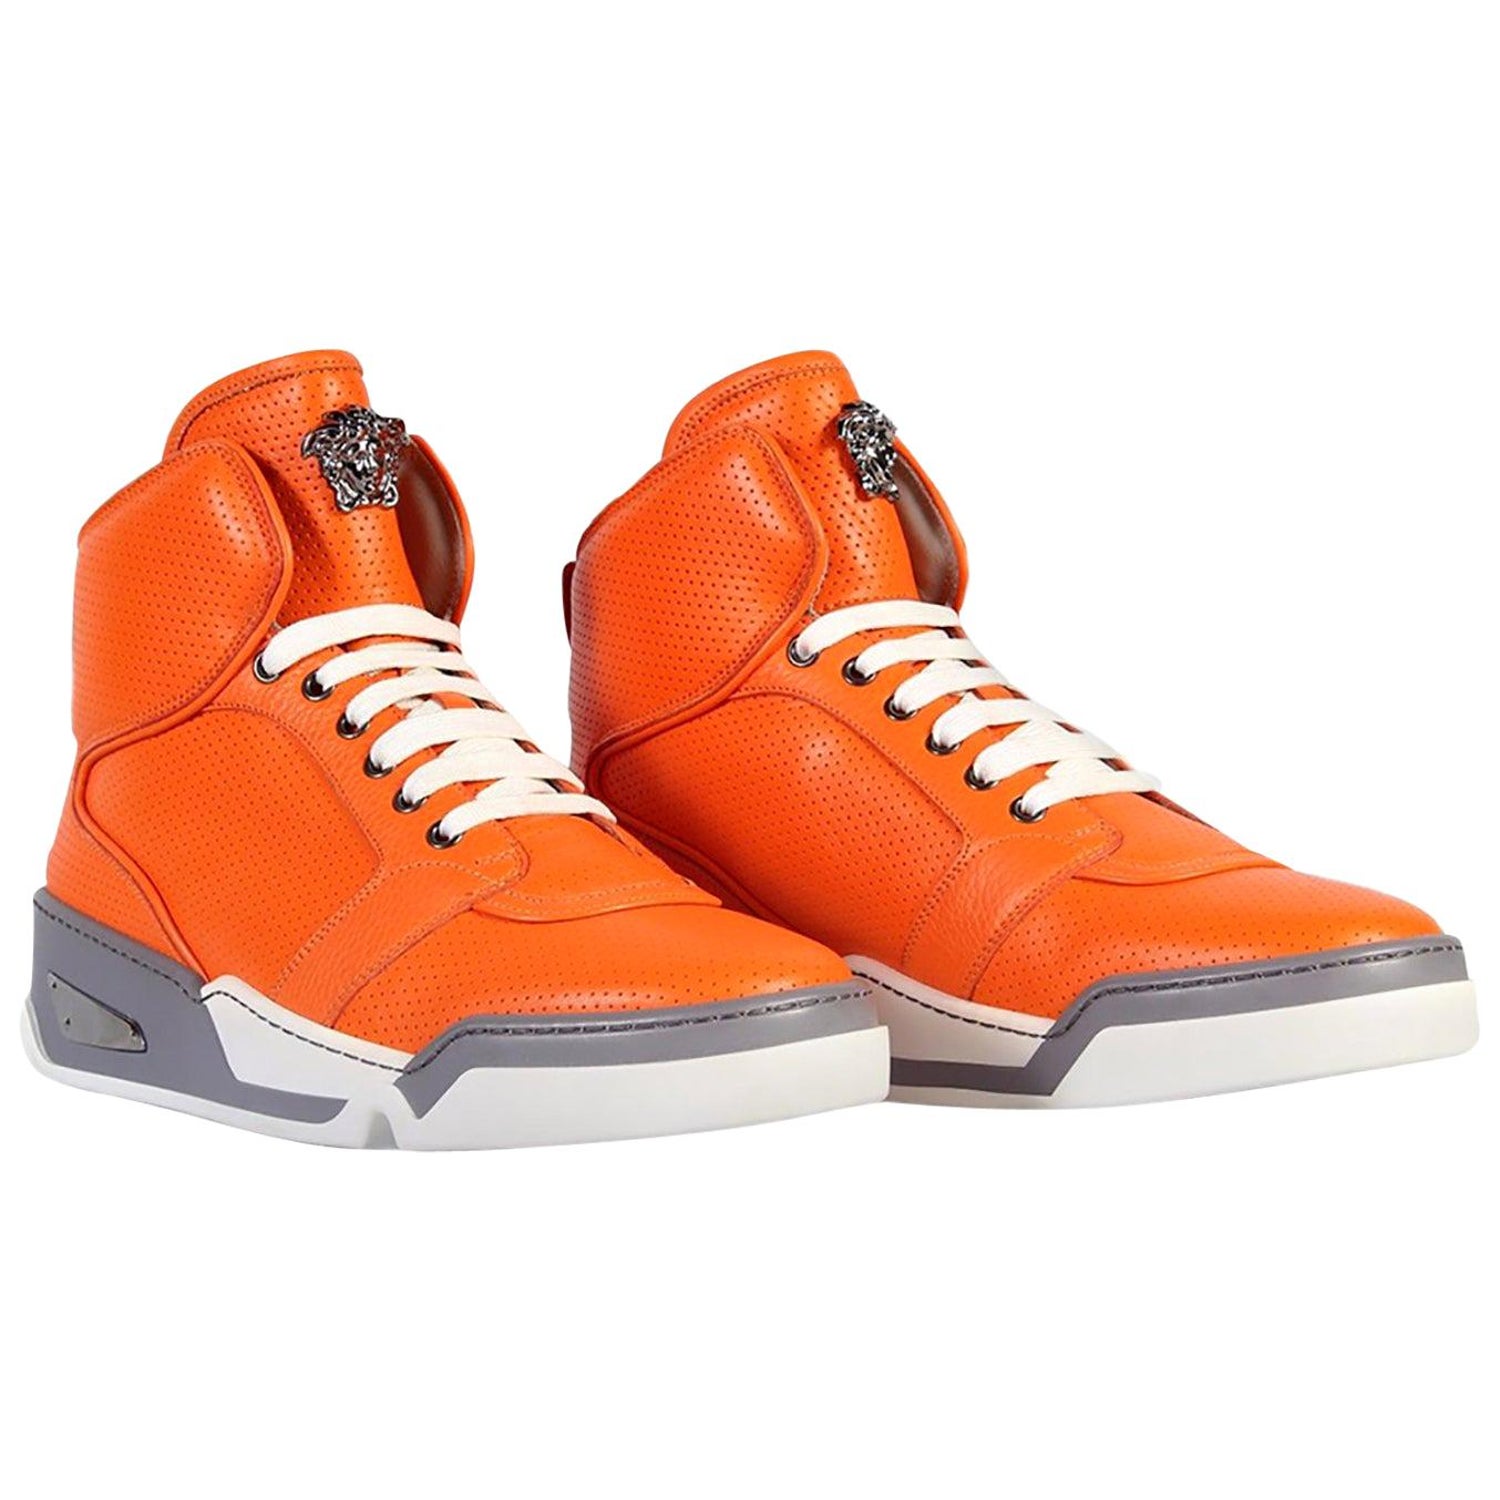 Versace Men's Orange Perforated Leather High-Top Sneakers sizes:  41,42,43,44,45 For Sale at 1stDibs